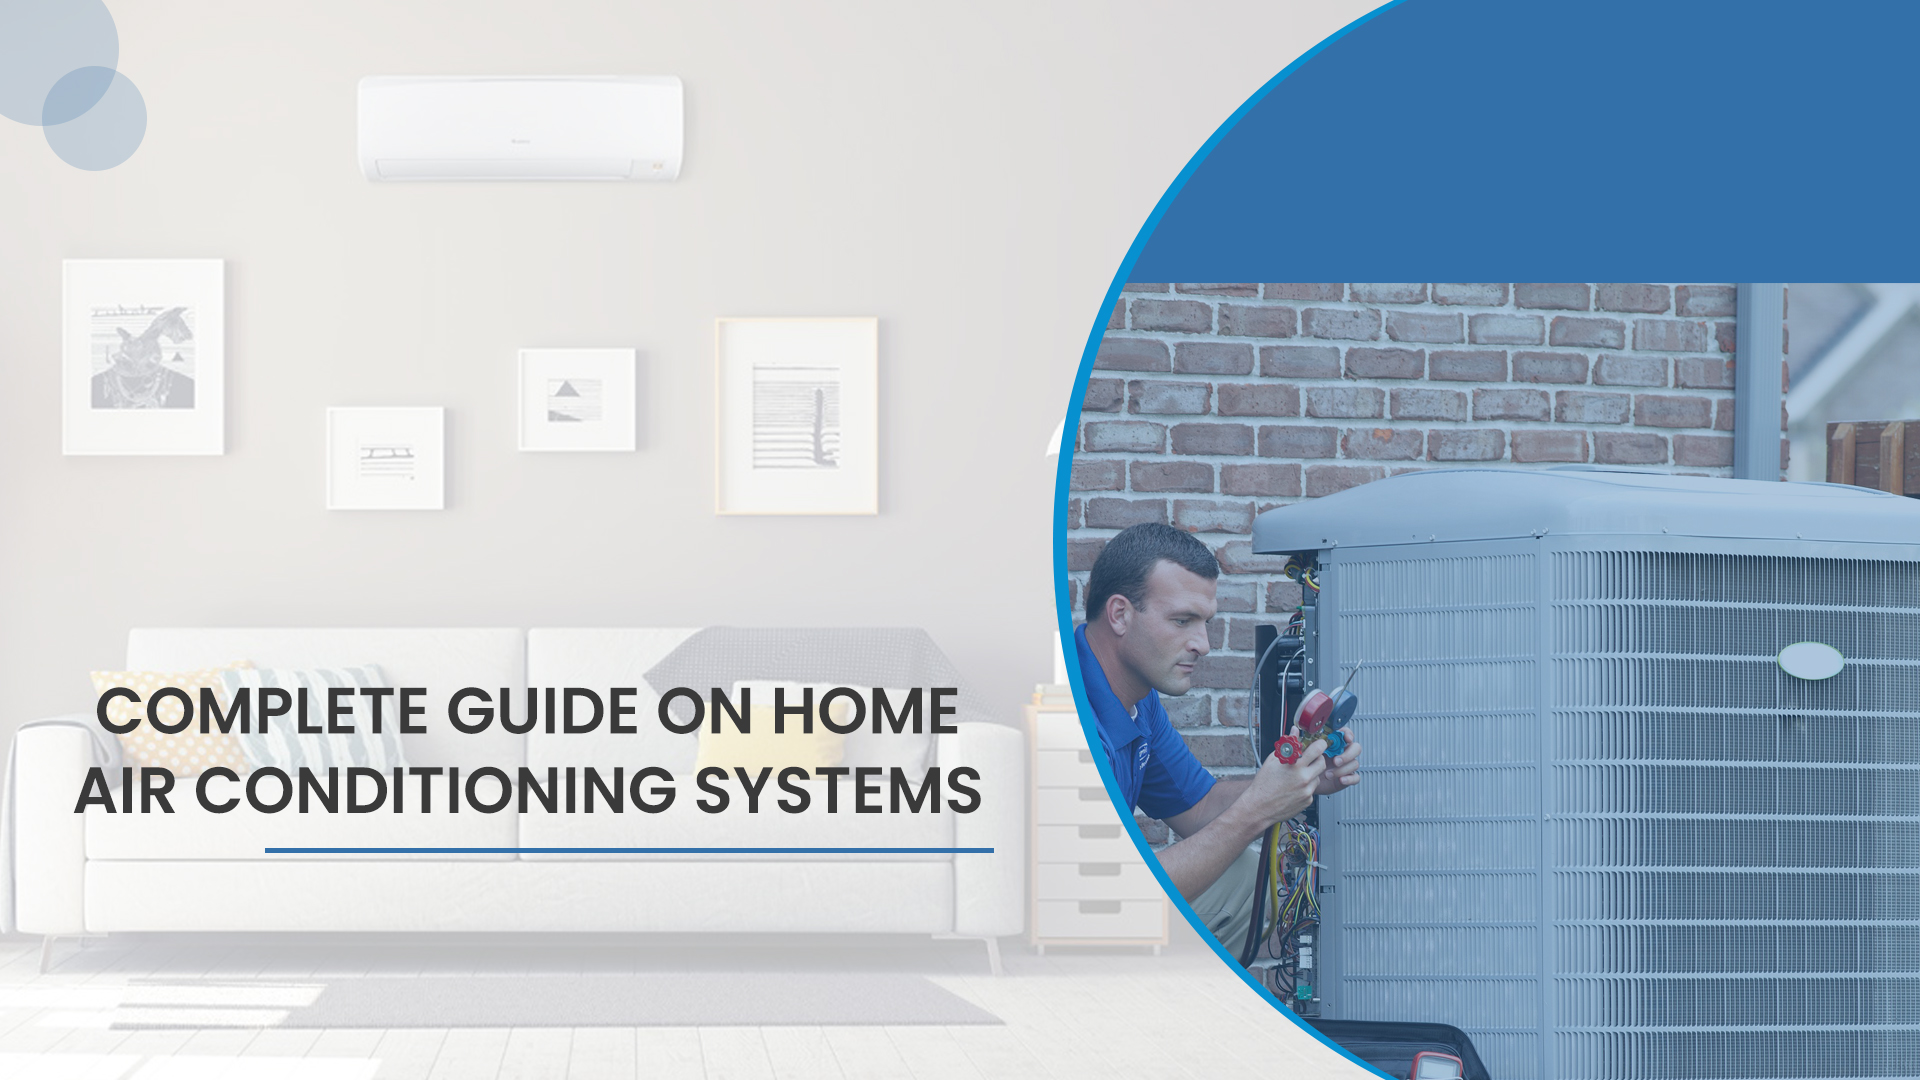 Complete Guide on Home Air Conditioning Systems